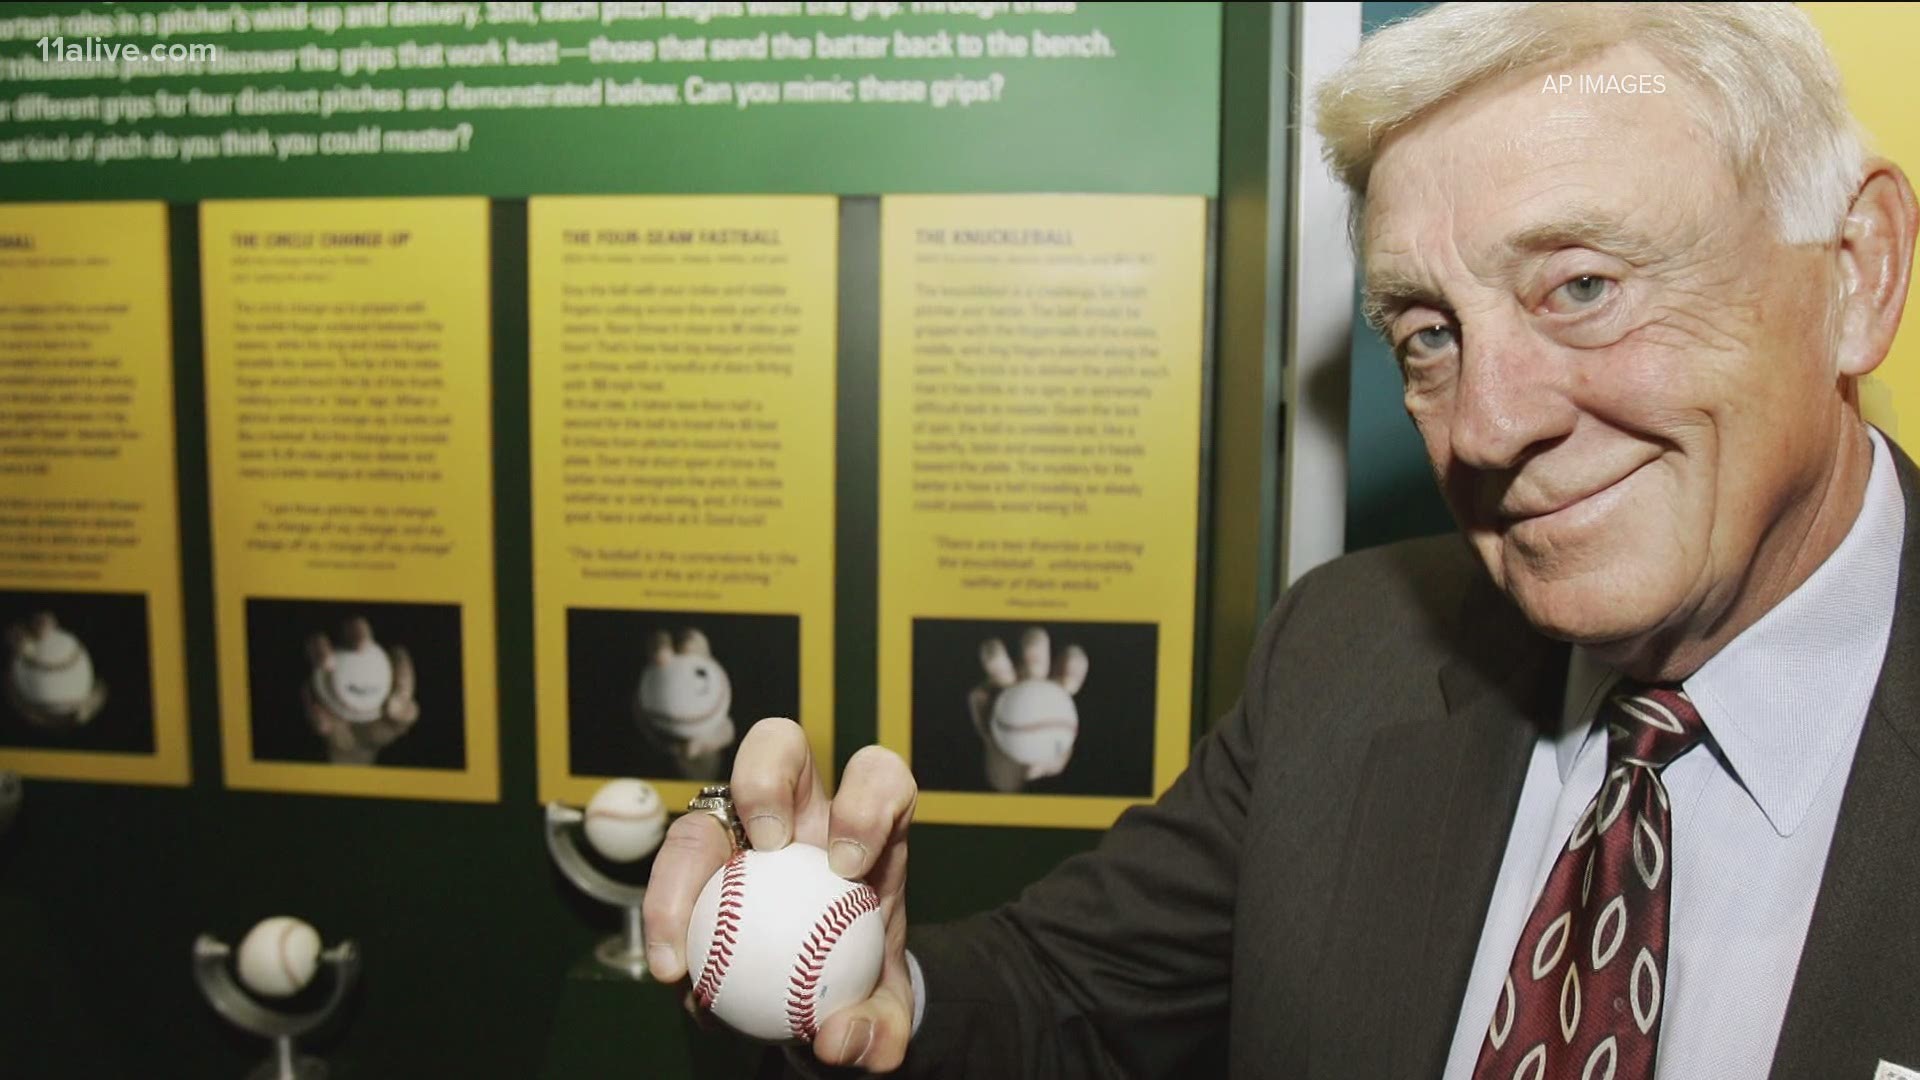 At the age of 81, Hall of Famer Phil Niekro passed away in his sleep after a long battle with cancer.